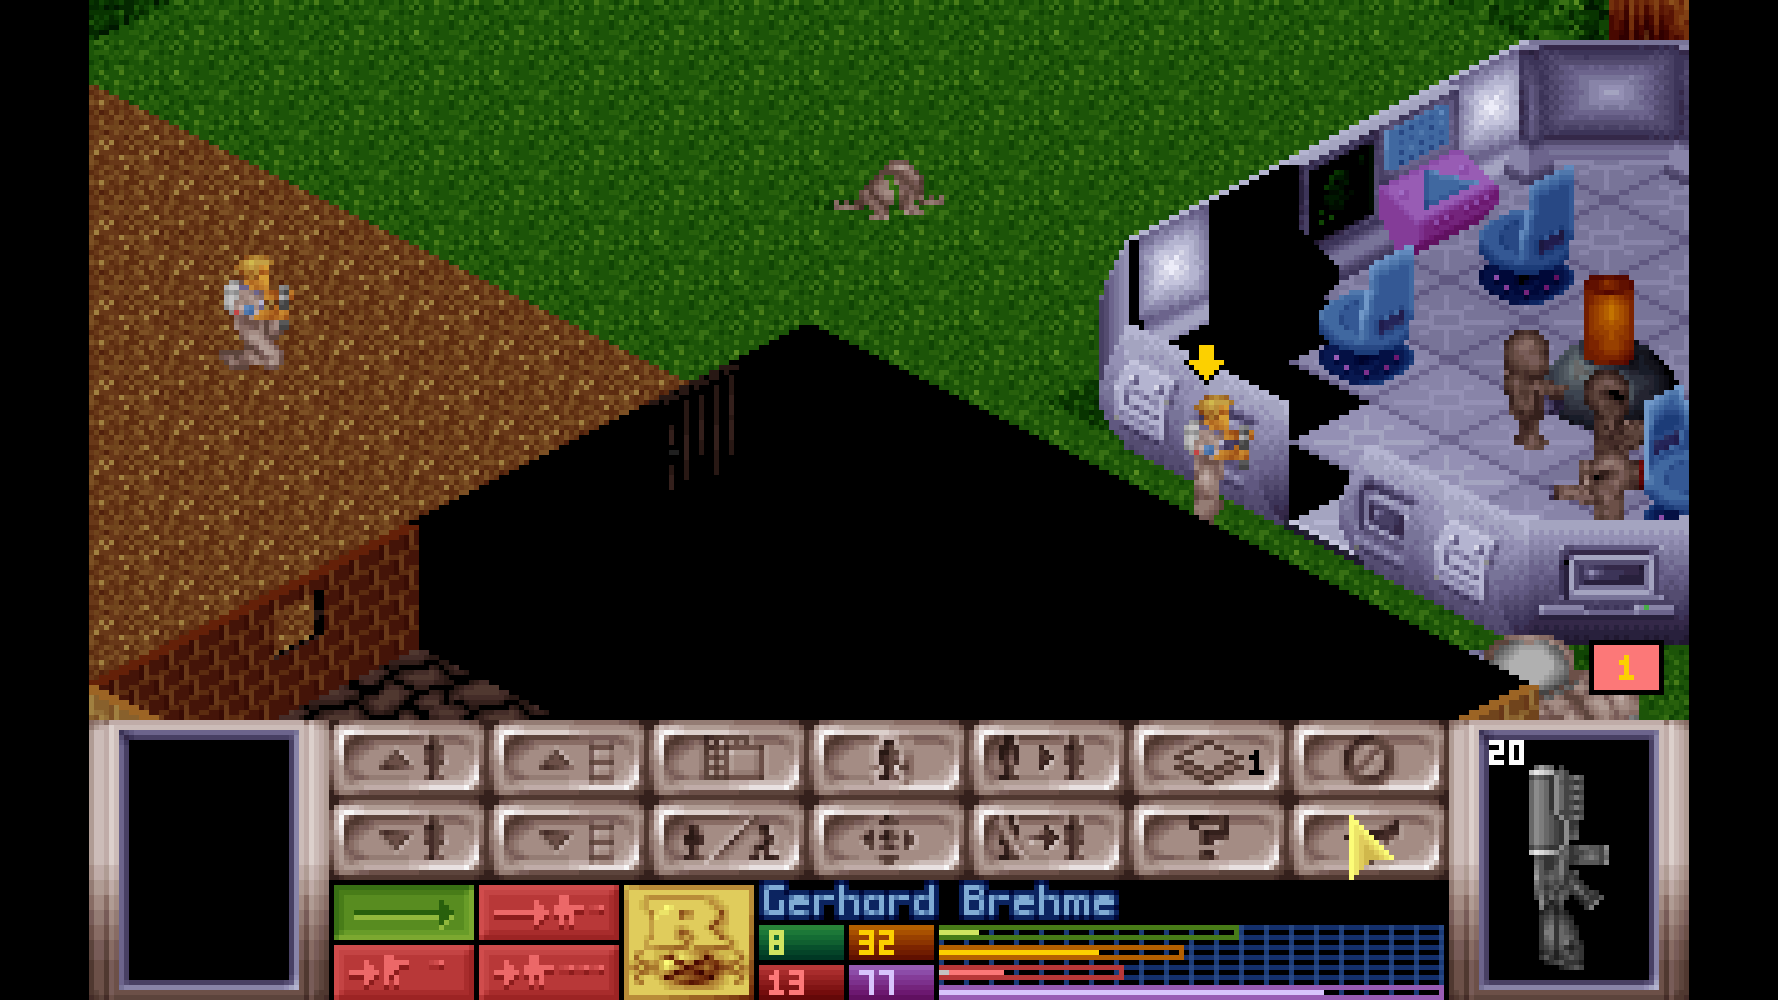 X-COM's isometric camera hid aliens until they were in a soldier's line of sight — and at that moment, the soldier's odds of survival plummeted. (Screenshot: MicroProse / MobyGames)